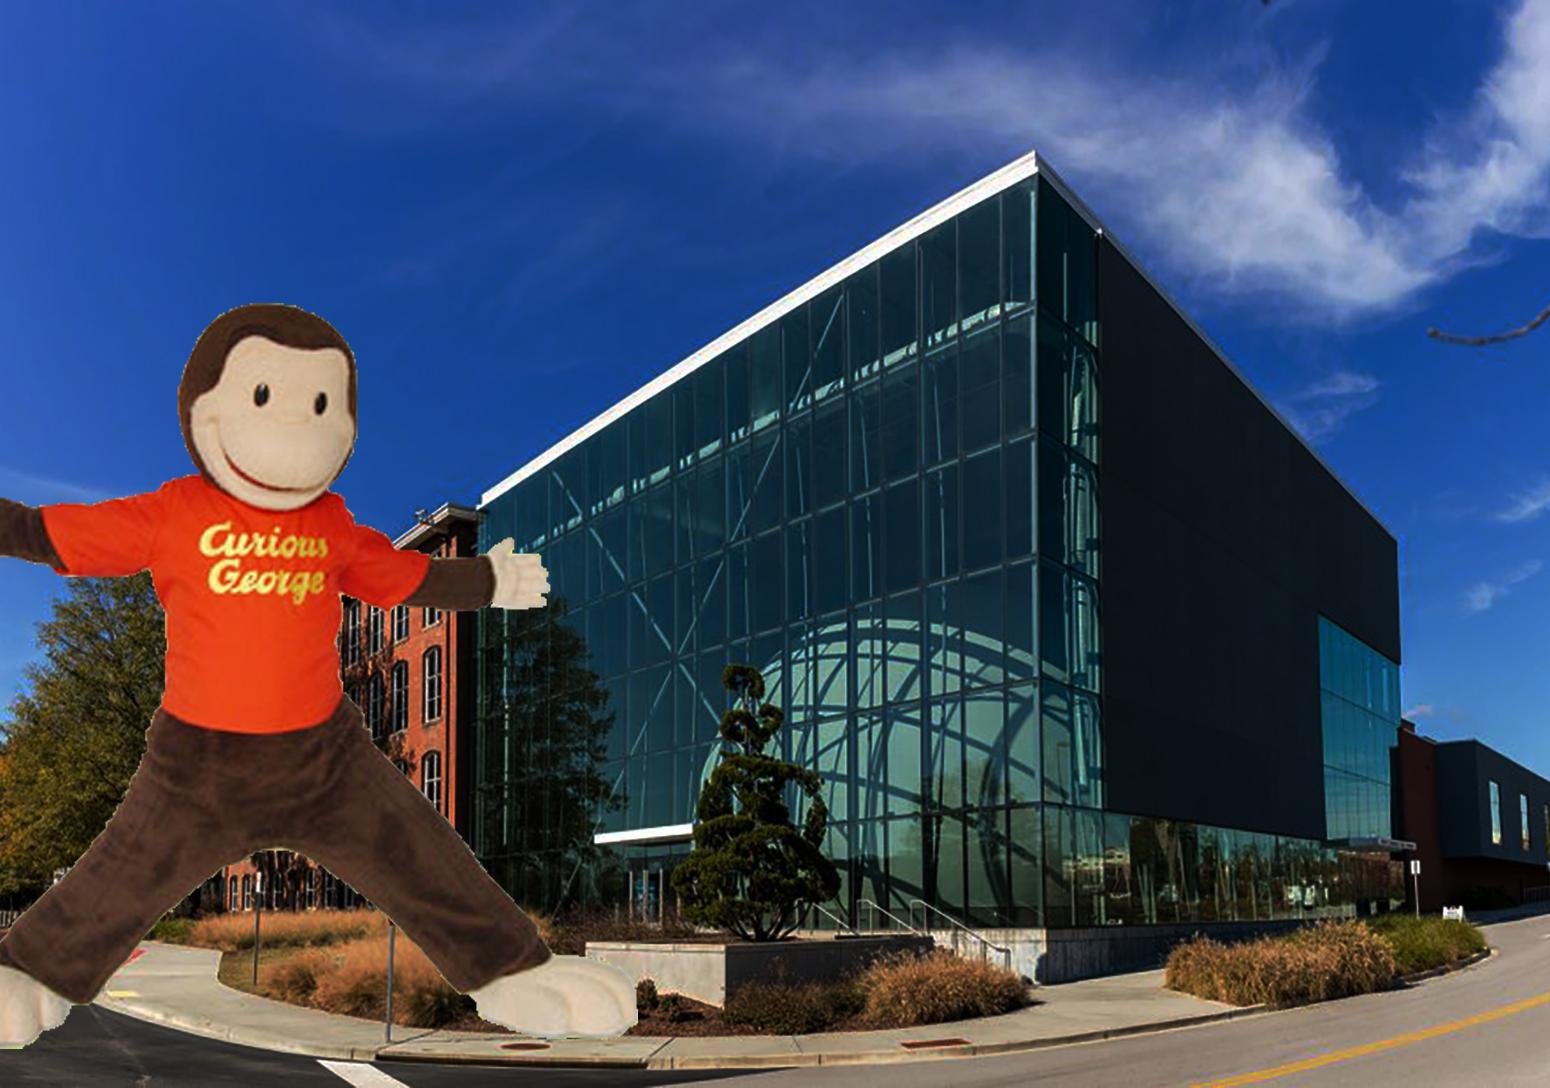 Curious George, a monkey stuffed animal with a red shirt with the outside of the South Carolina State Museum behind him